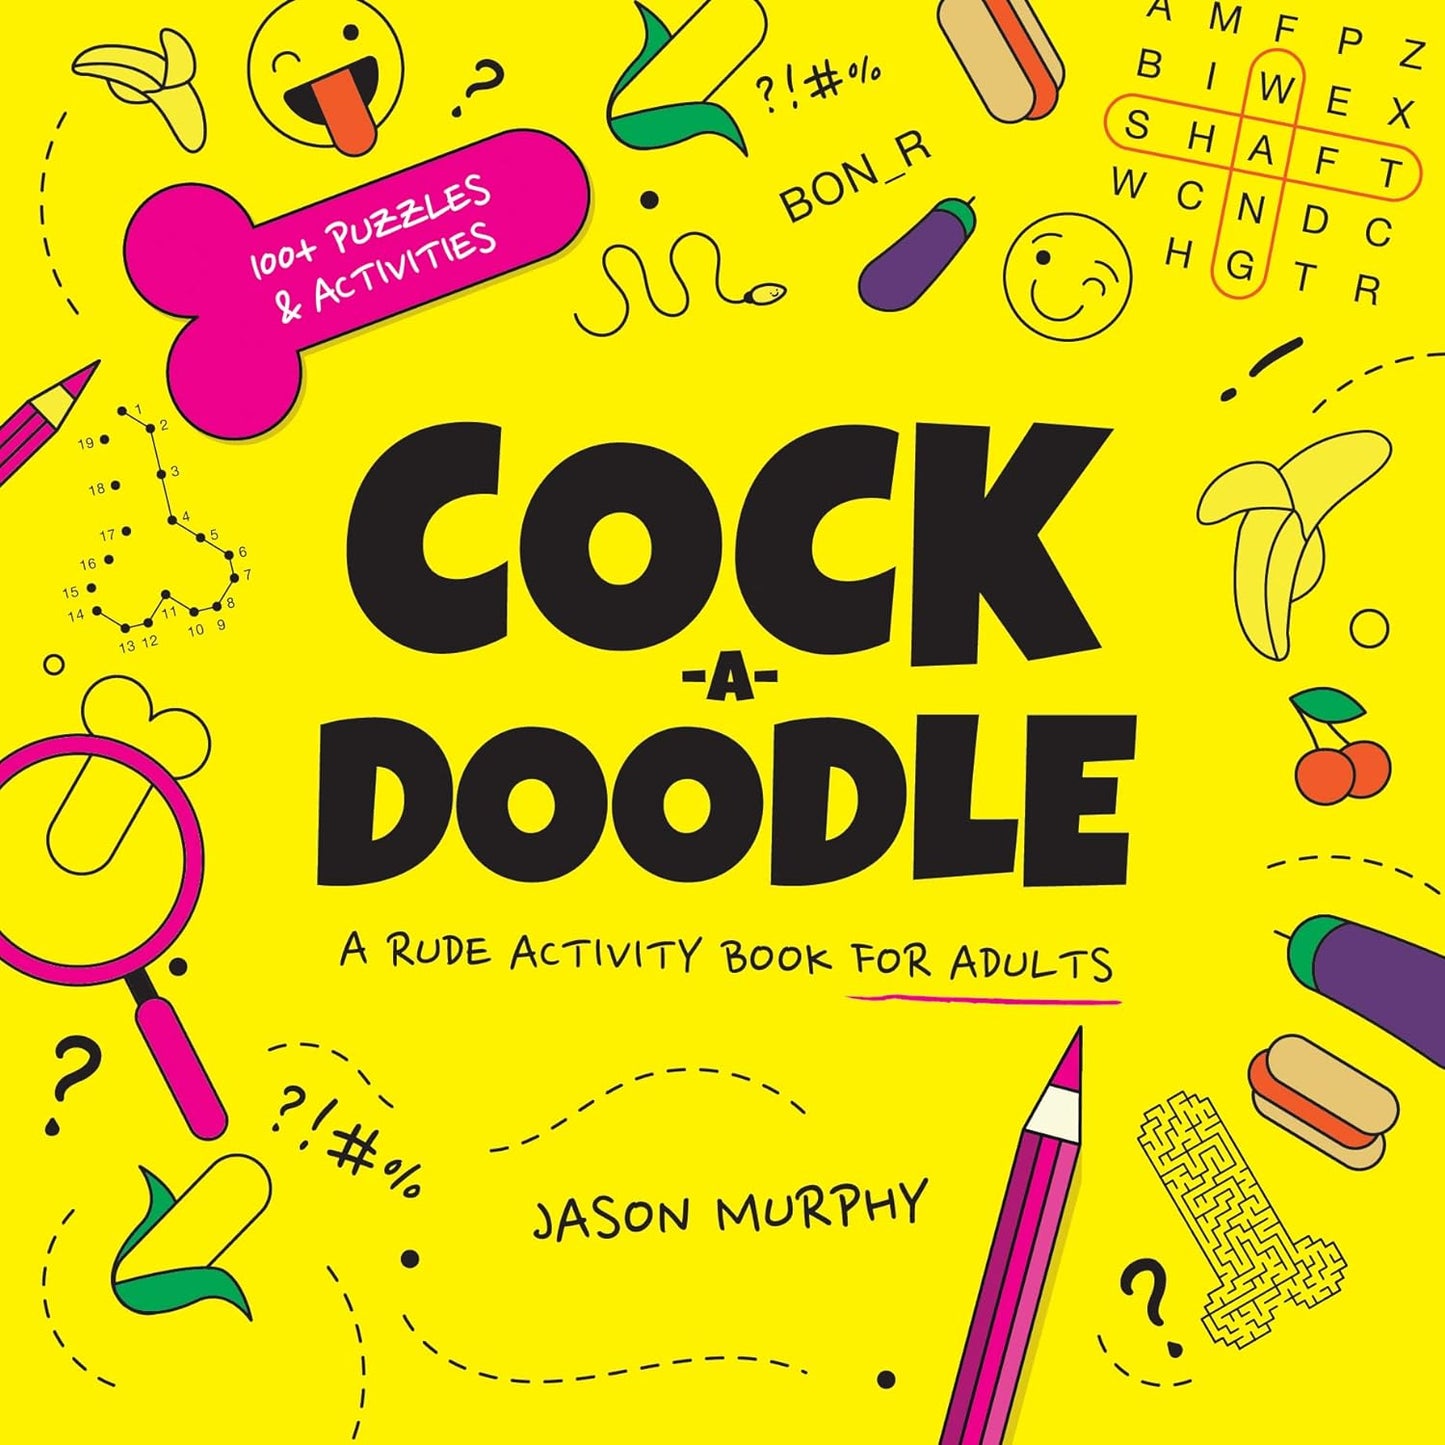 Cock-A-Doodle Rude Activity Book For Adults